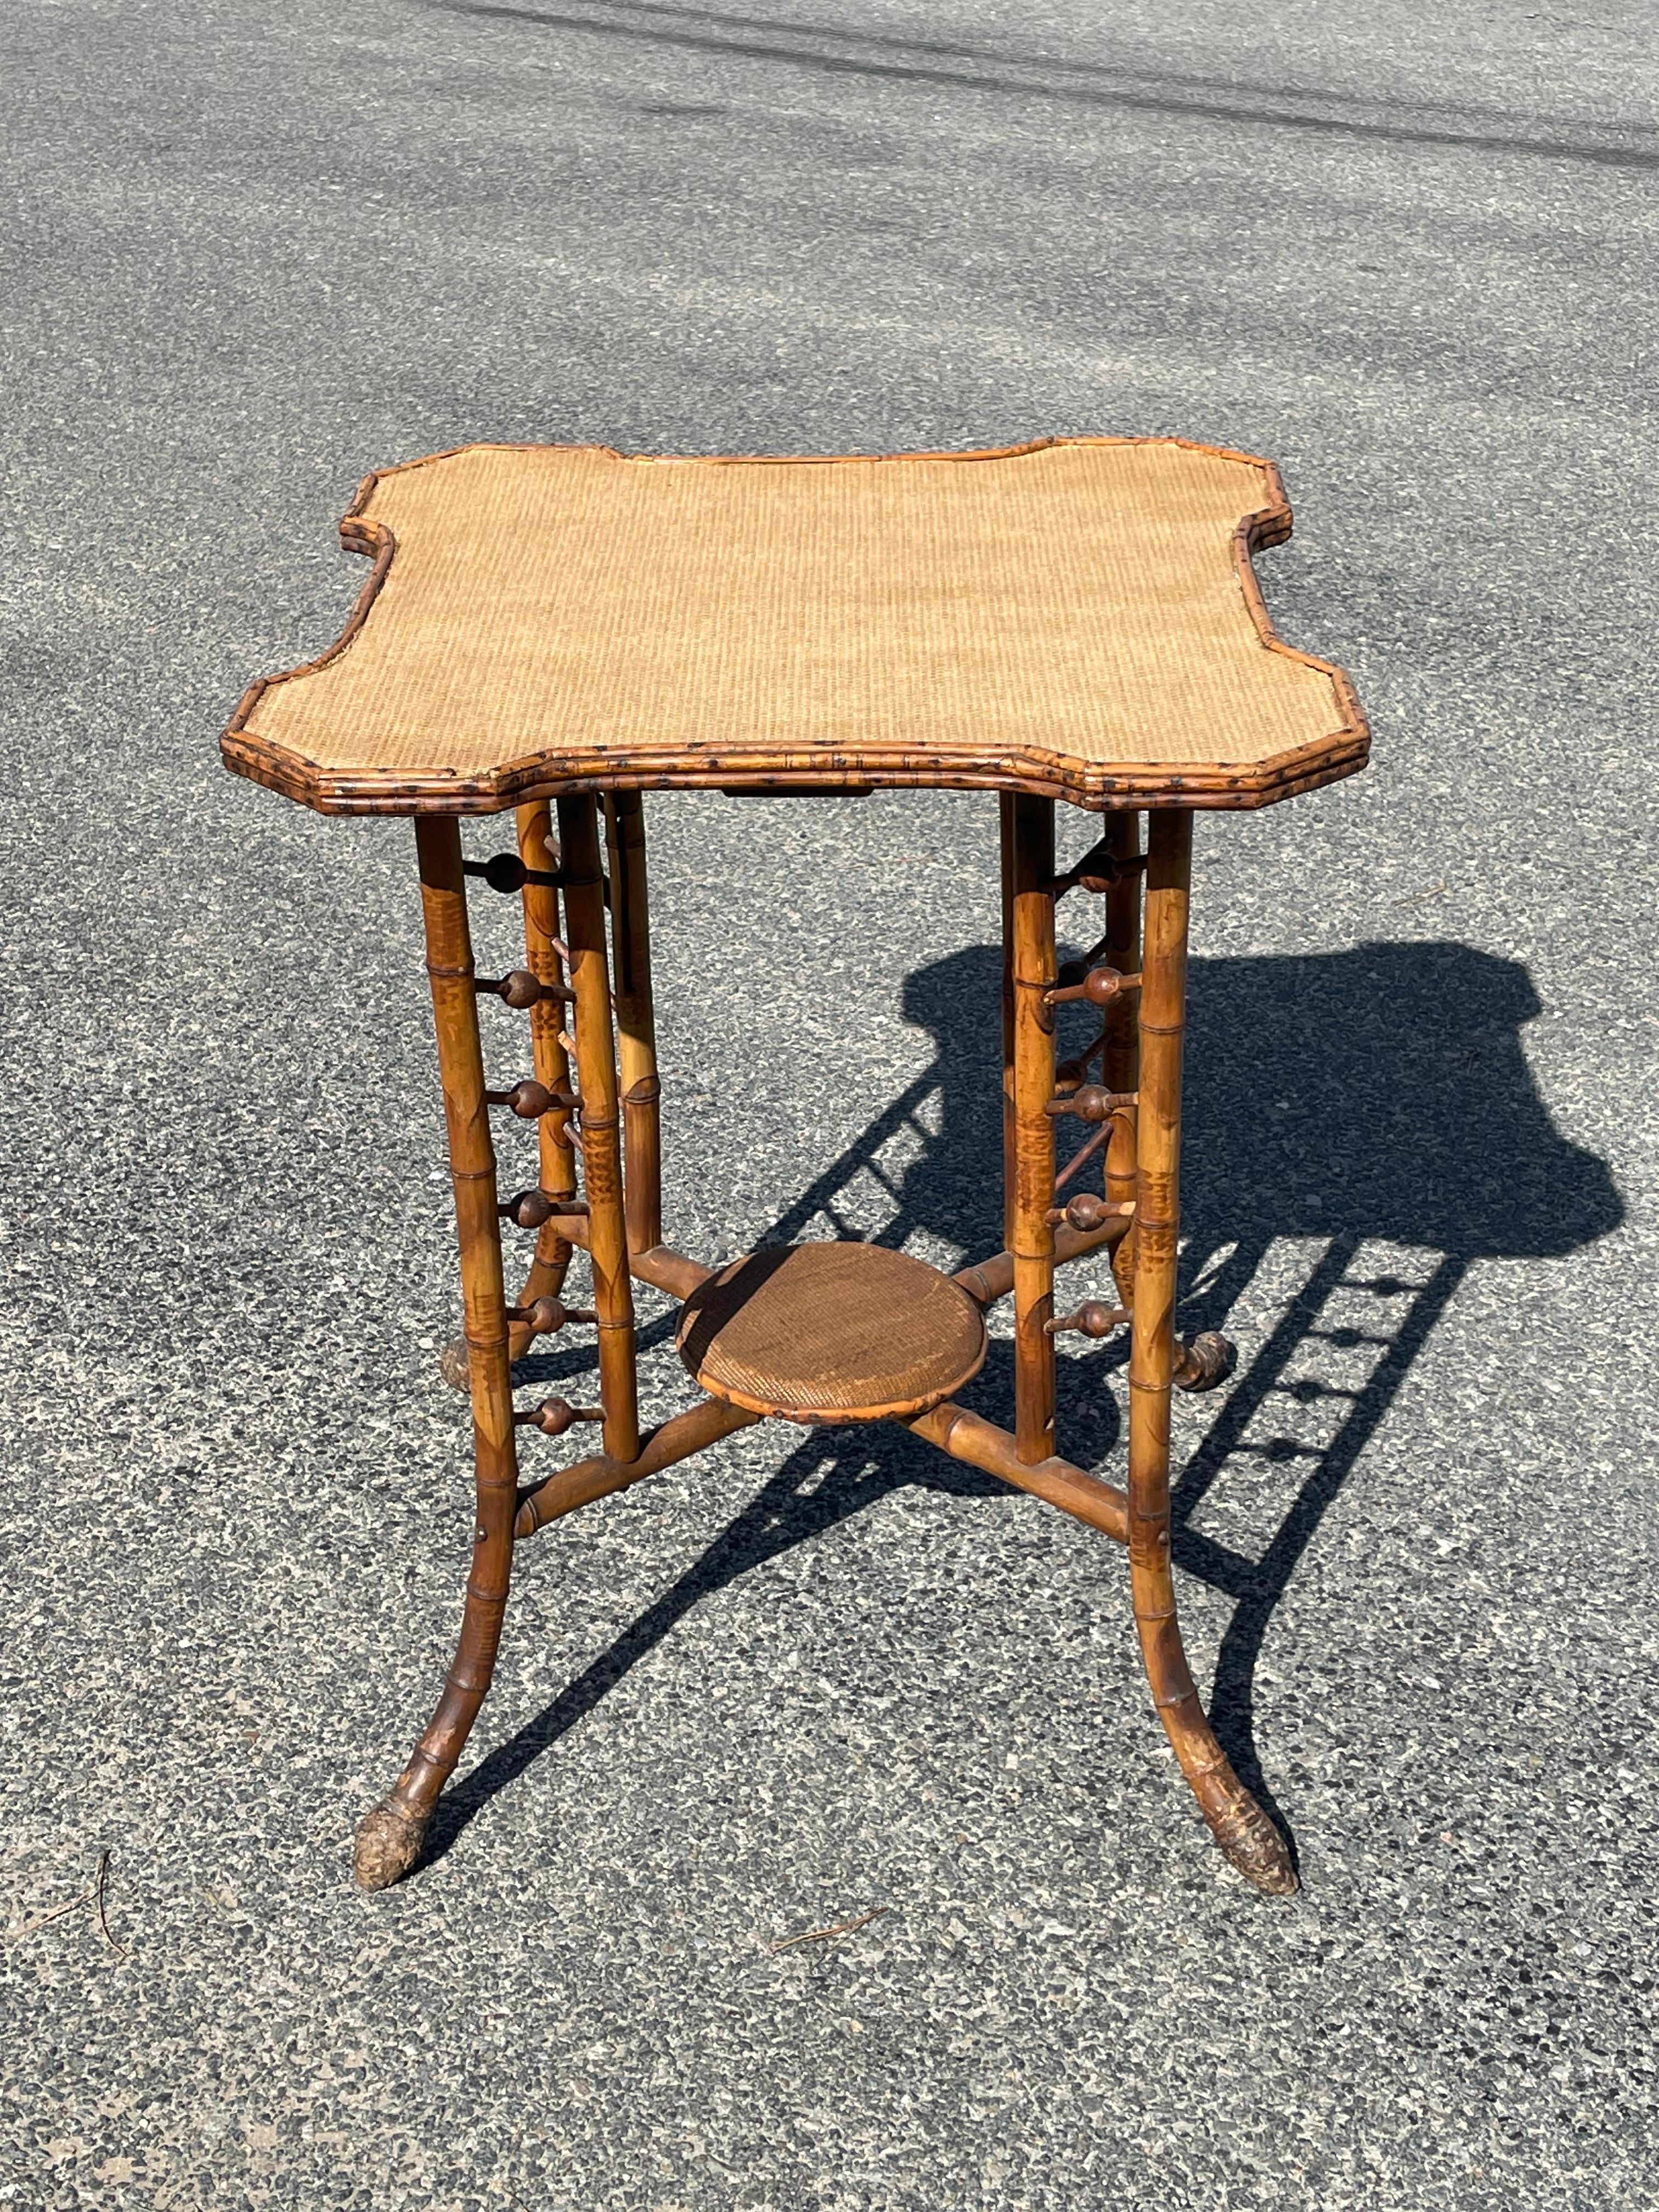 Lovely 19th century bamboo side table with cut corners and grasscloth (newer replacement) top, decorative stick and ball openwork base.